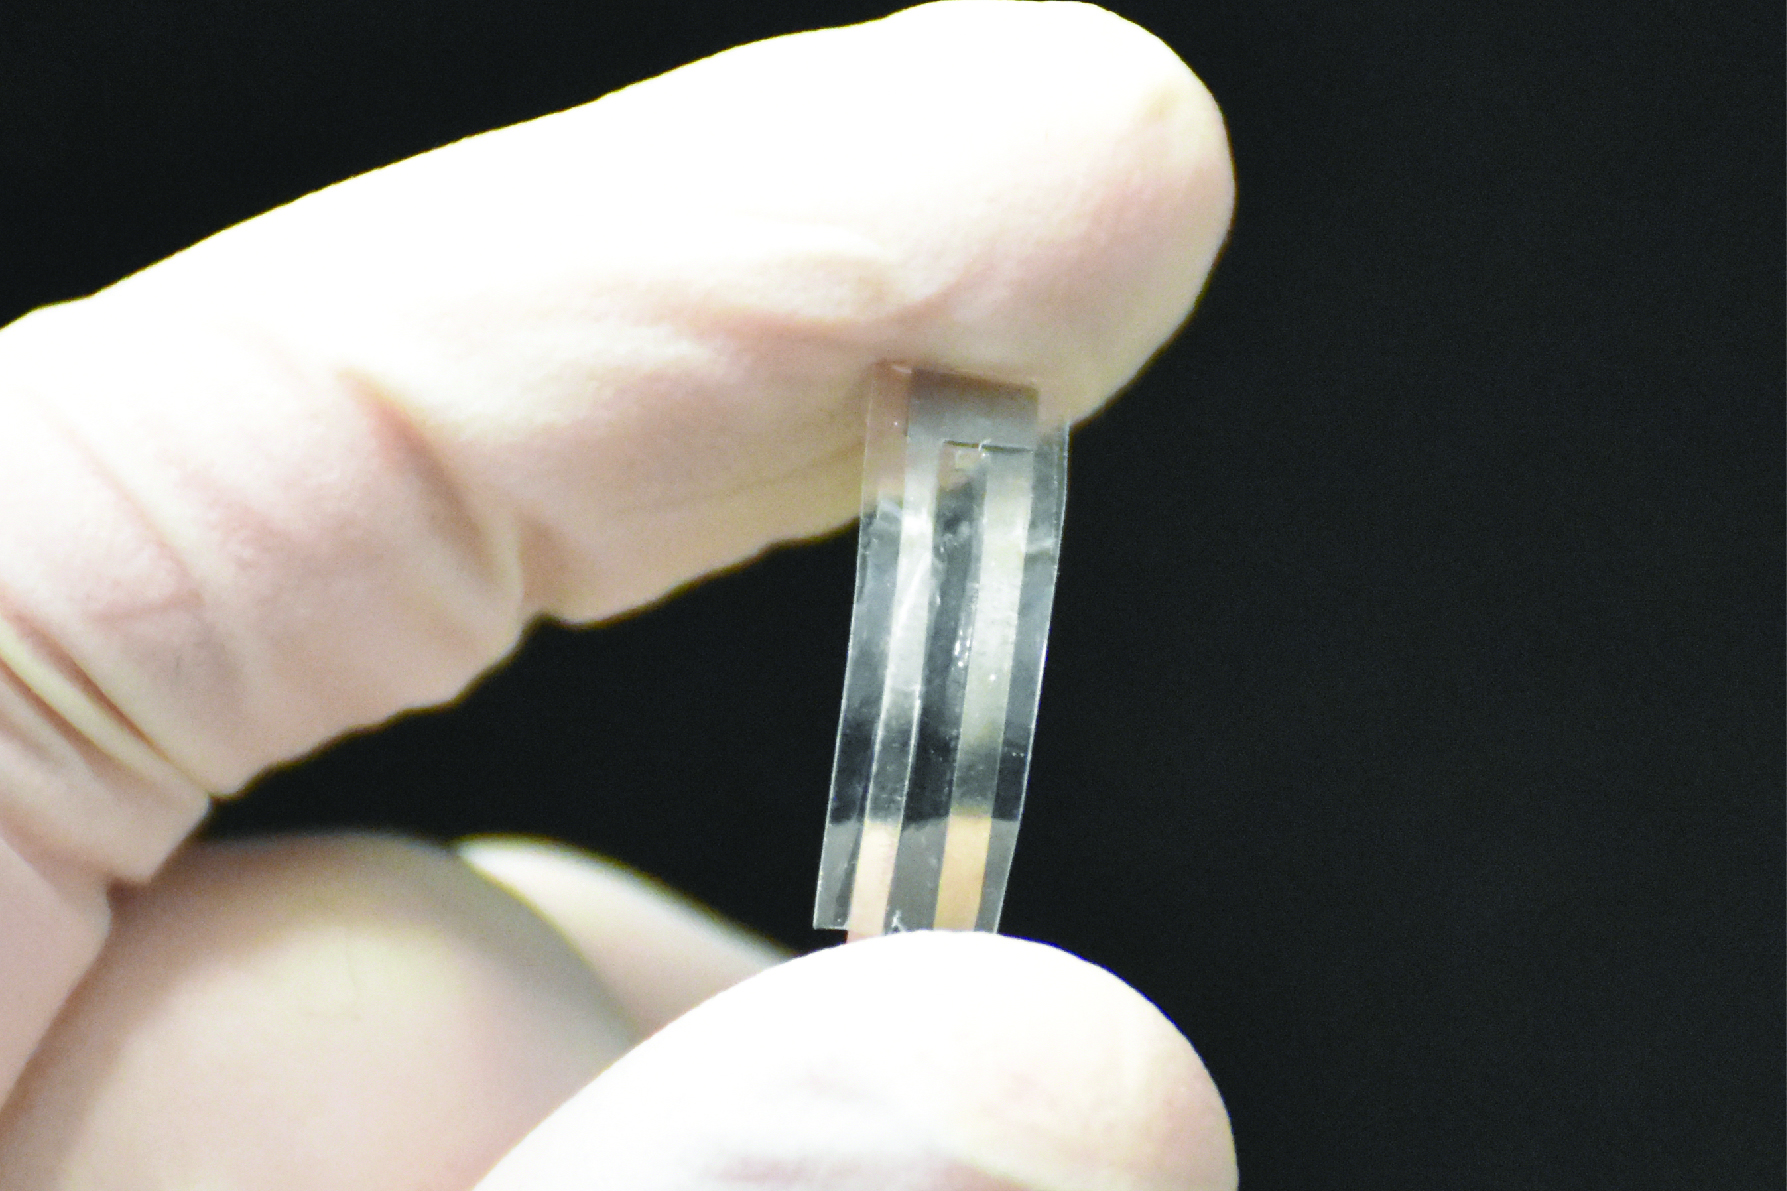 This biodegradable piezoelectric pressure sensor developed by the Nguyen Research Group at UConn could be used by doctors to monitor chronic lung disease, brain swelling, and other medical conditions before dissolving safely in a patient’s body. (Image courtesy of Thanh Duc Nguyen)